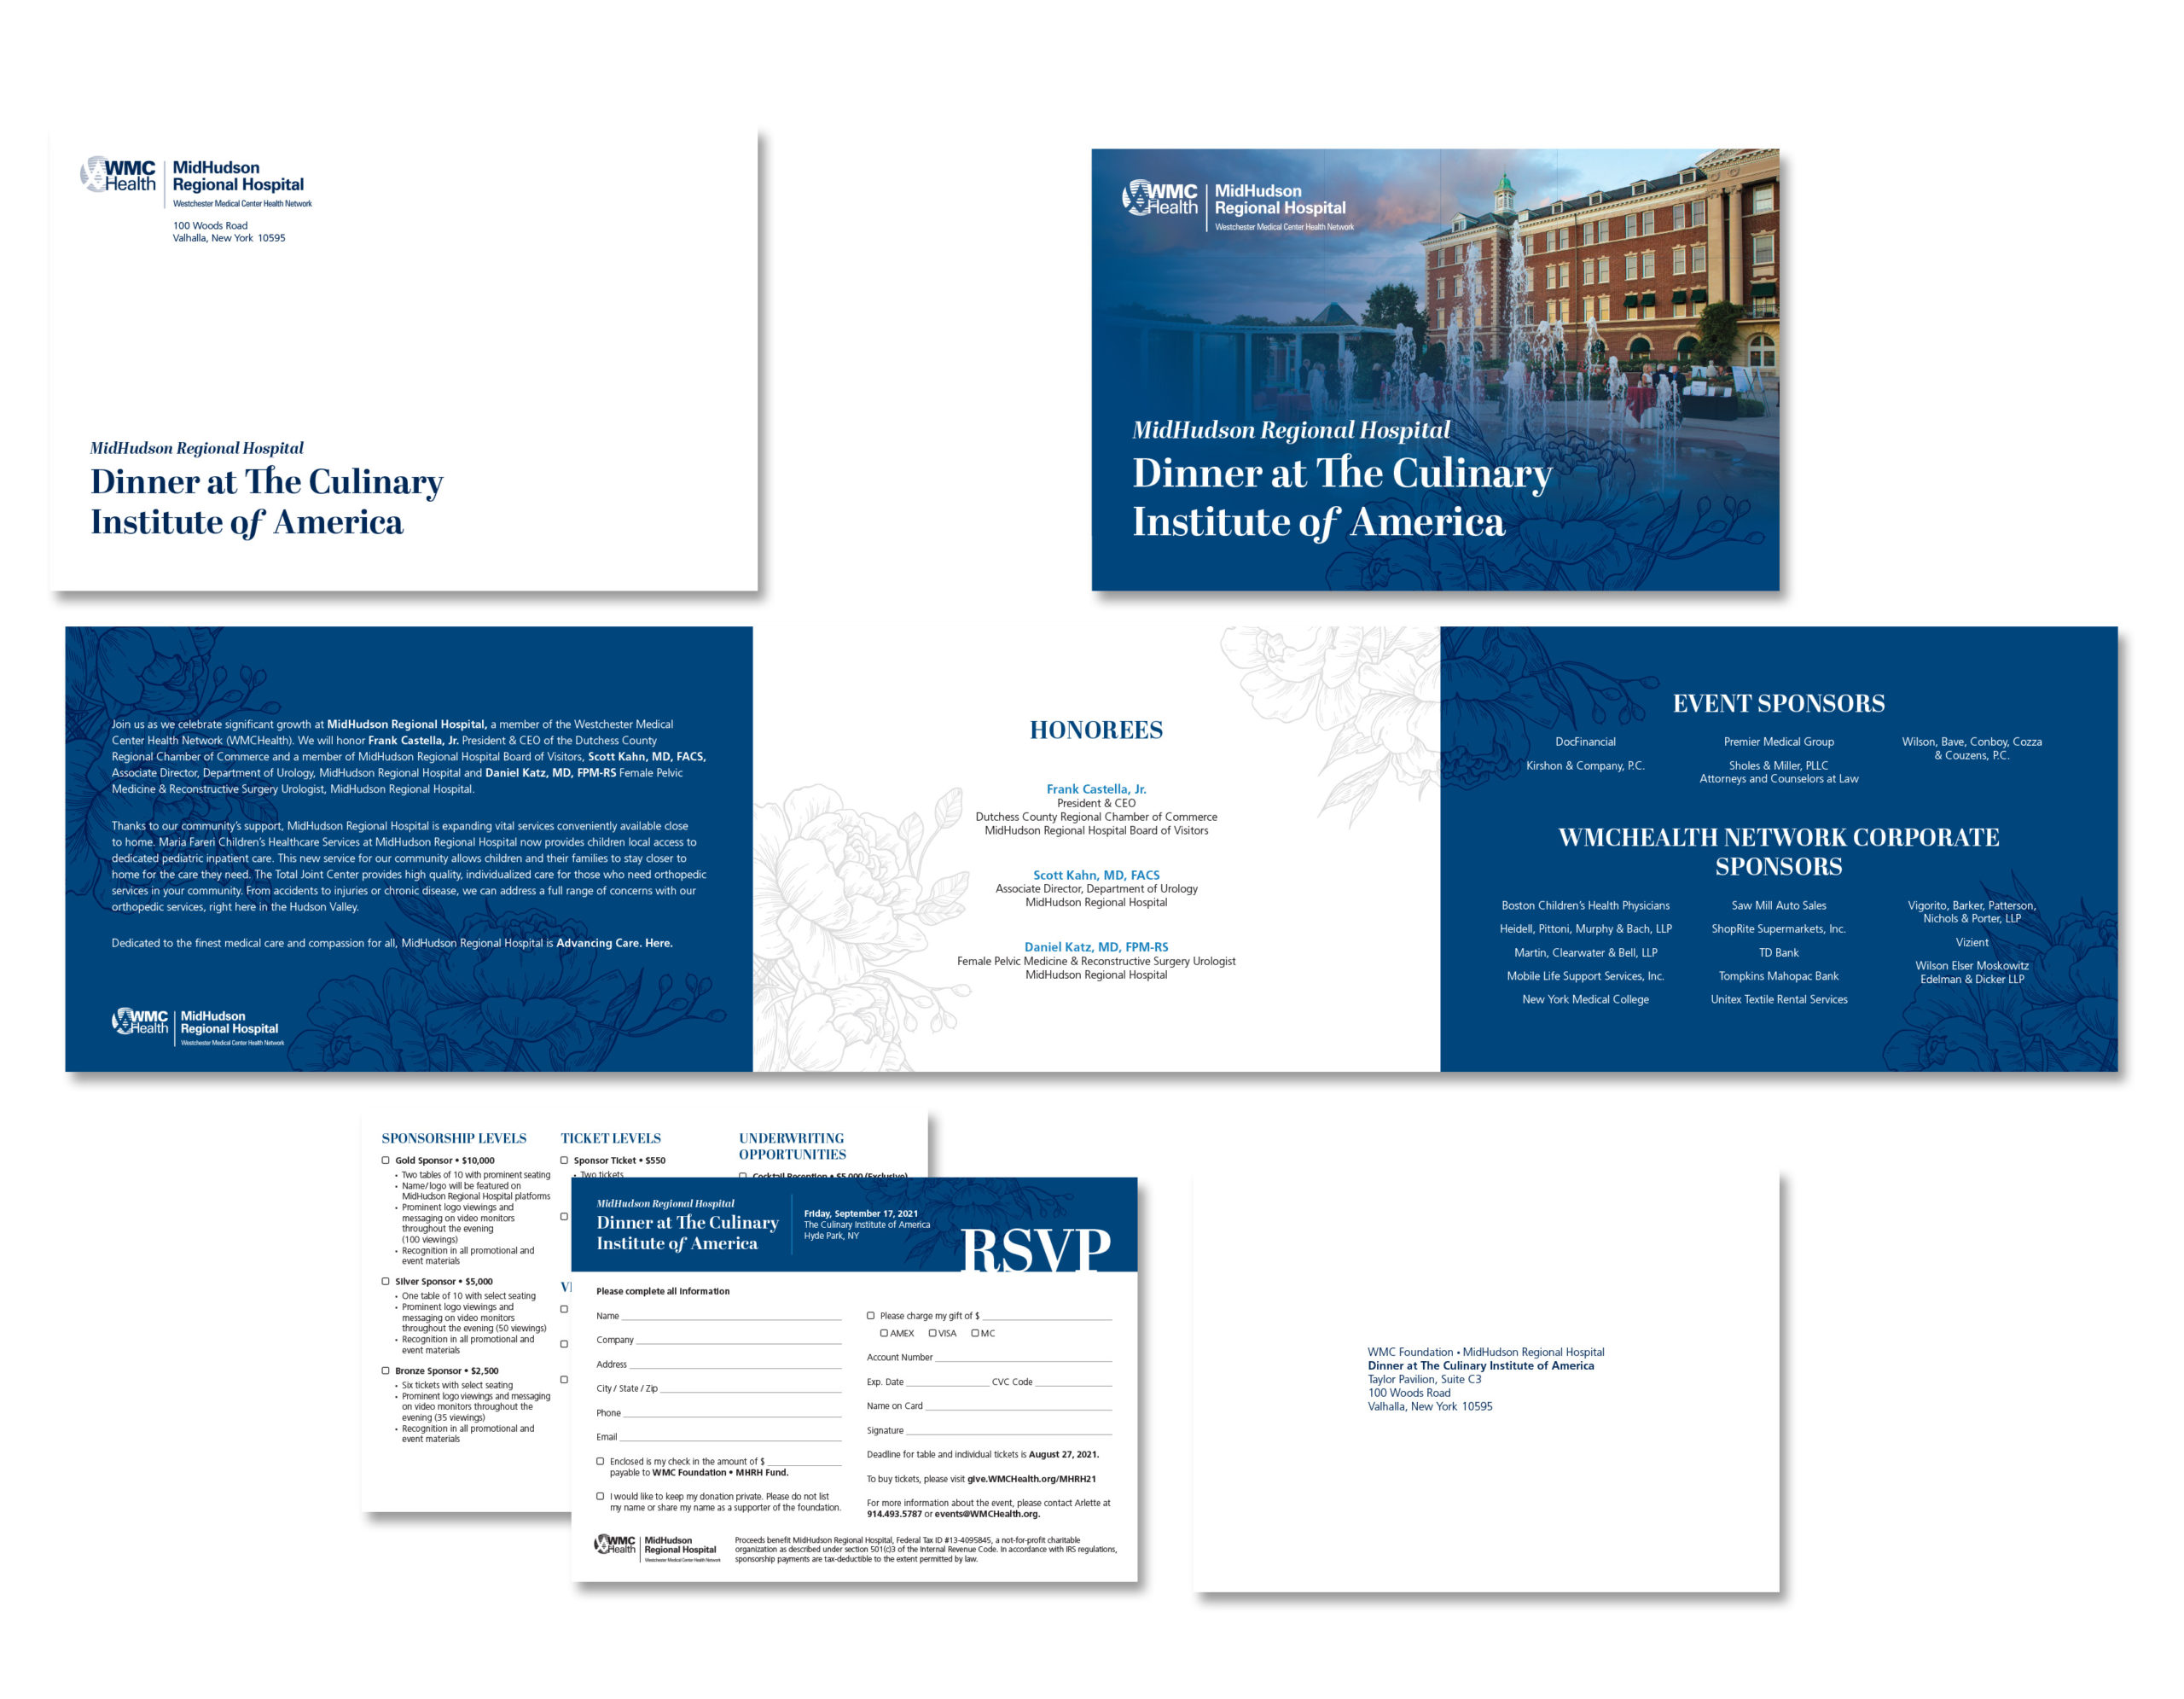 Mid-Hudson Regional Hospital invitation package for a dinner at the Culinary Institute